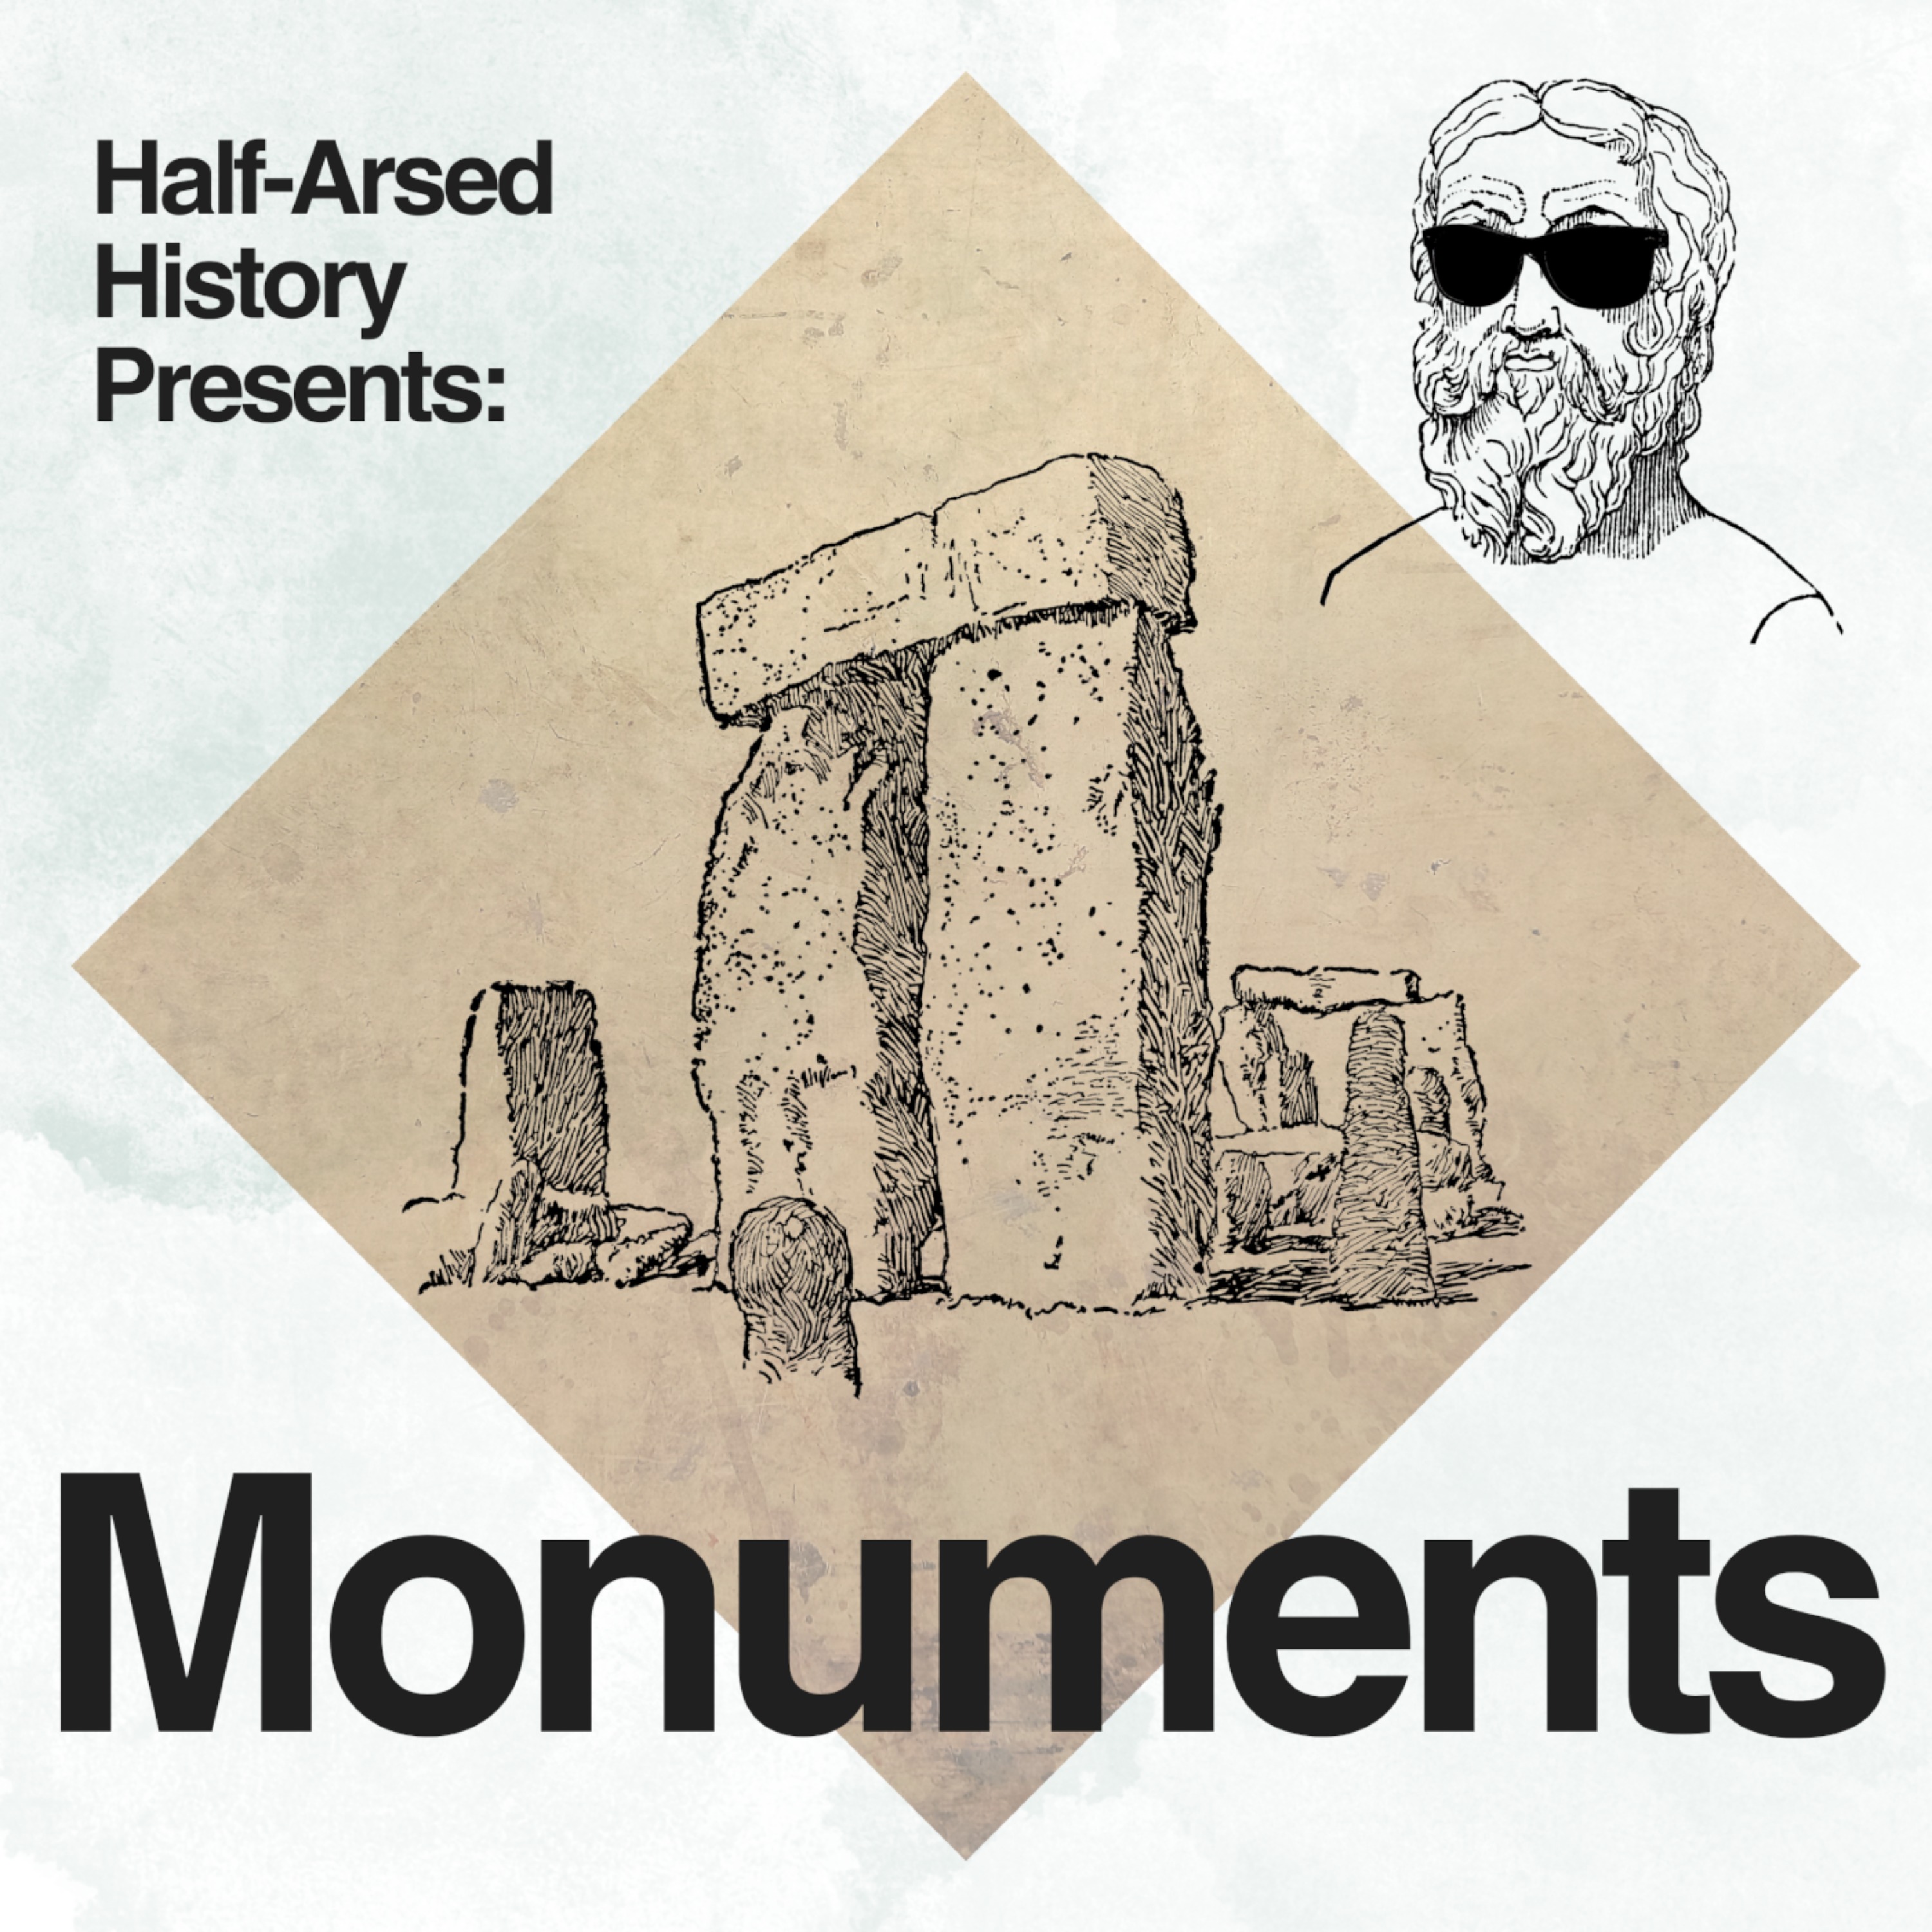 Monuments Episode 10: The Church of the Holy Sepulchre